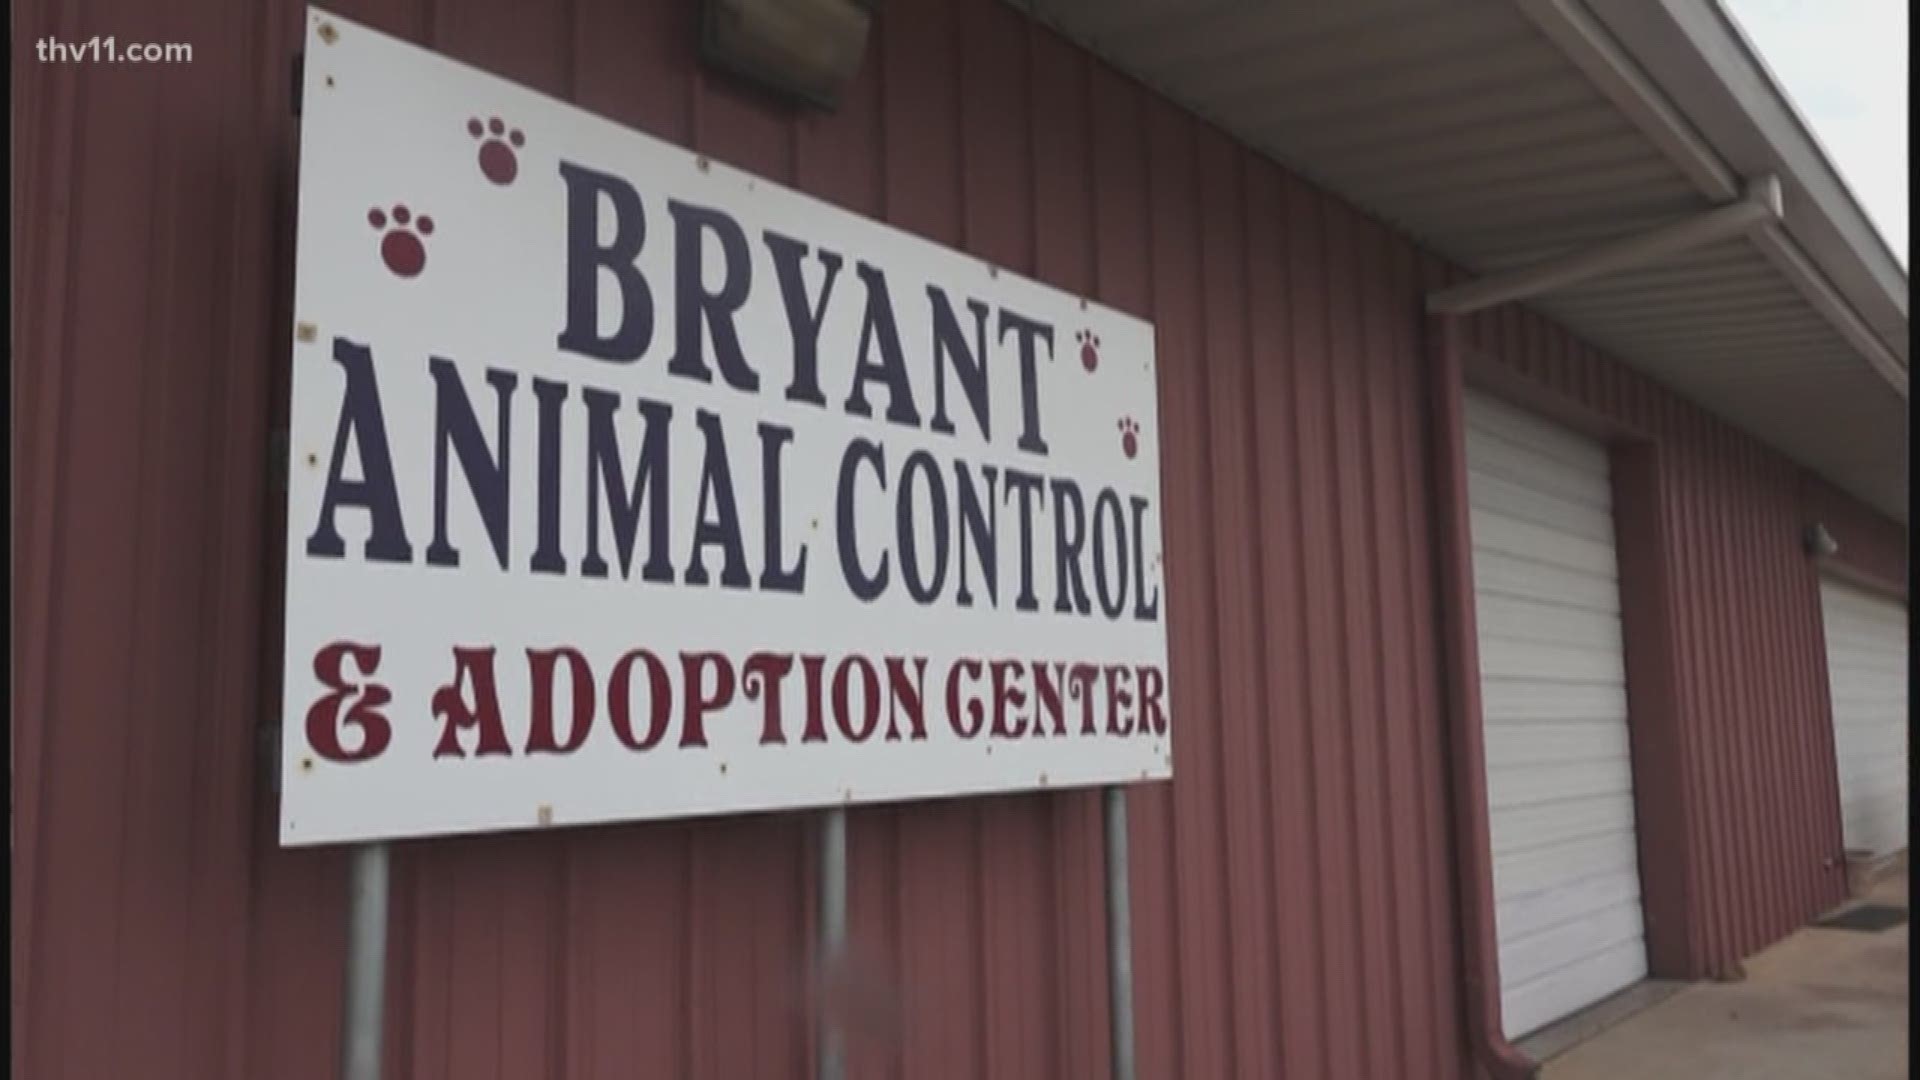 The illness has caused the Bryant Animal Shelter to close dog adoptions and intake, while doctors try to figure out what's going on.